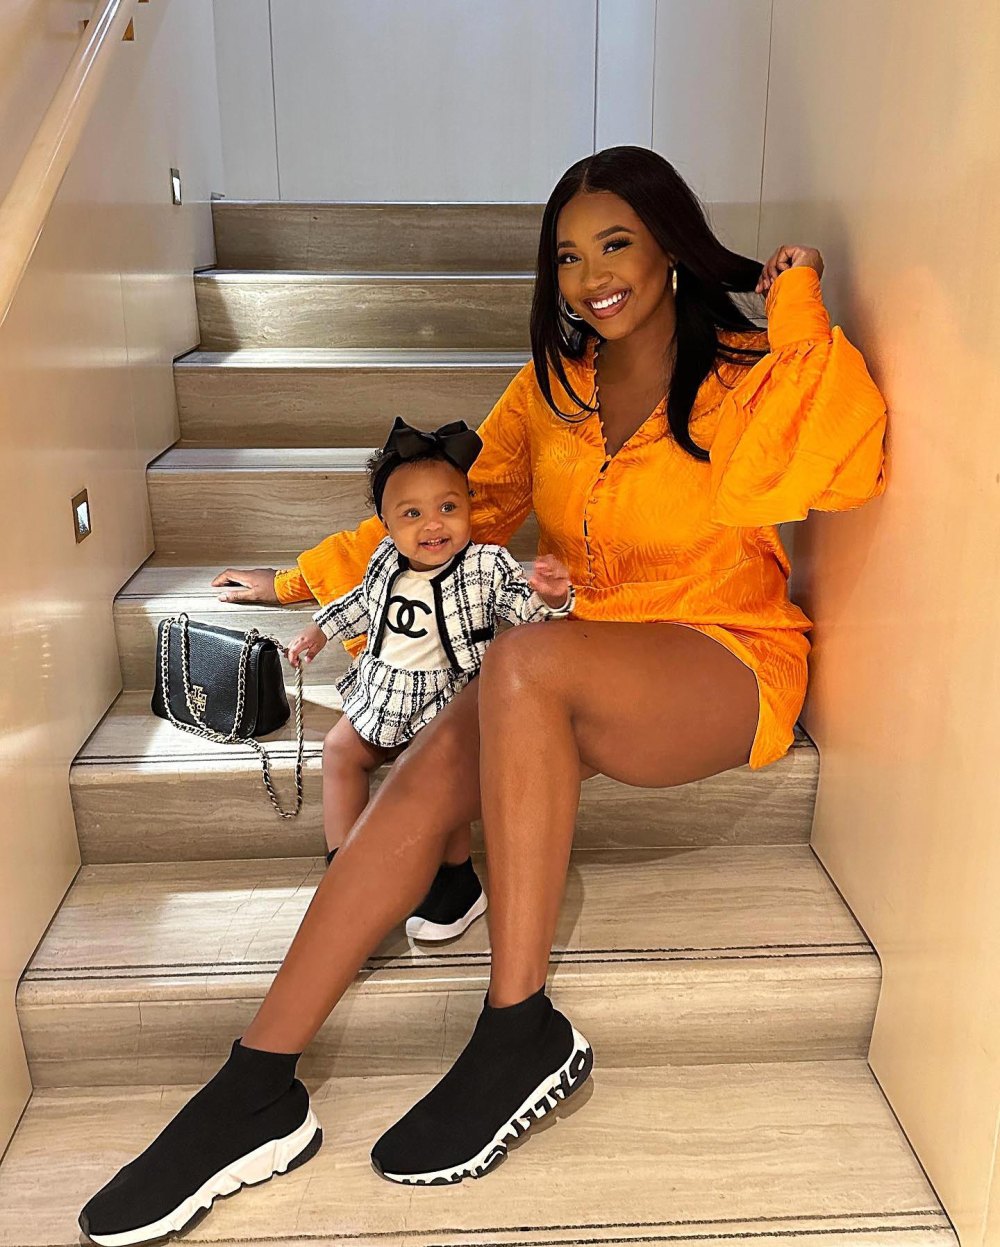 Bayleigh Dayton Is Pregnant, Expecting Baby No. 2 With Swaggy C